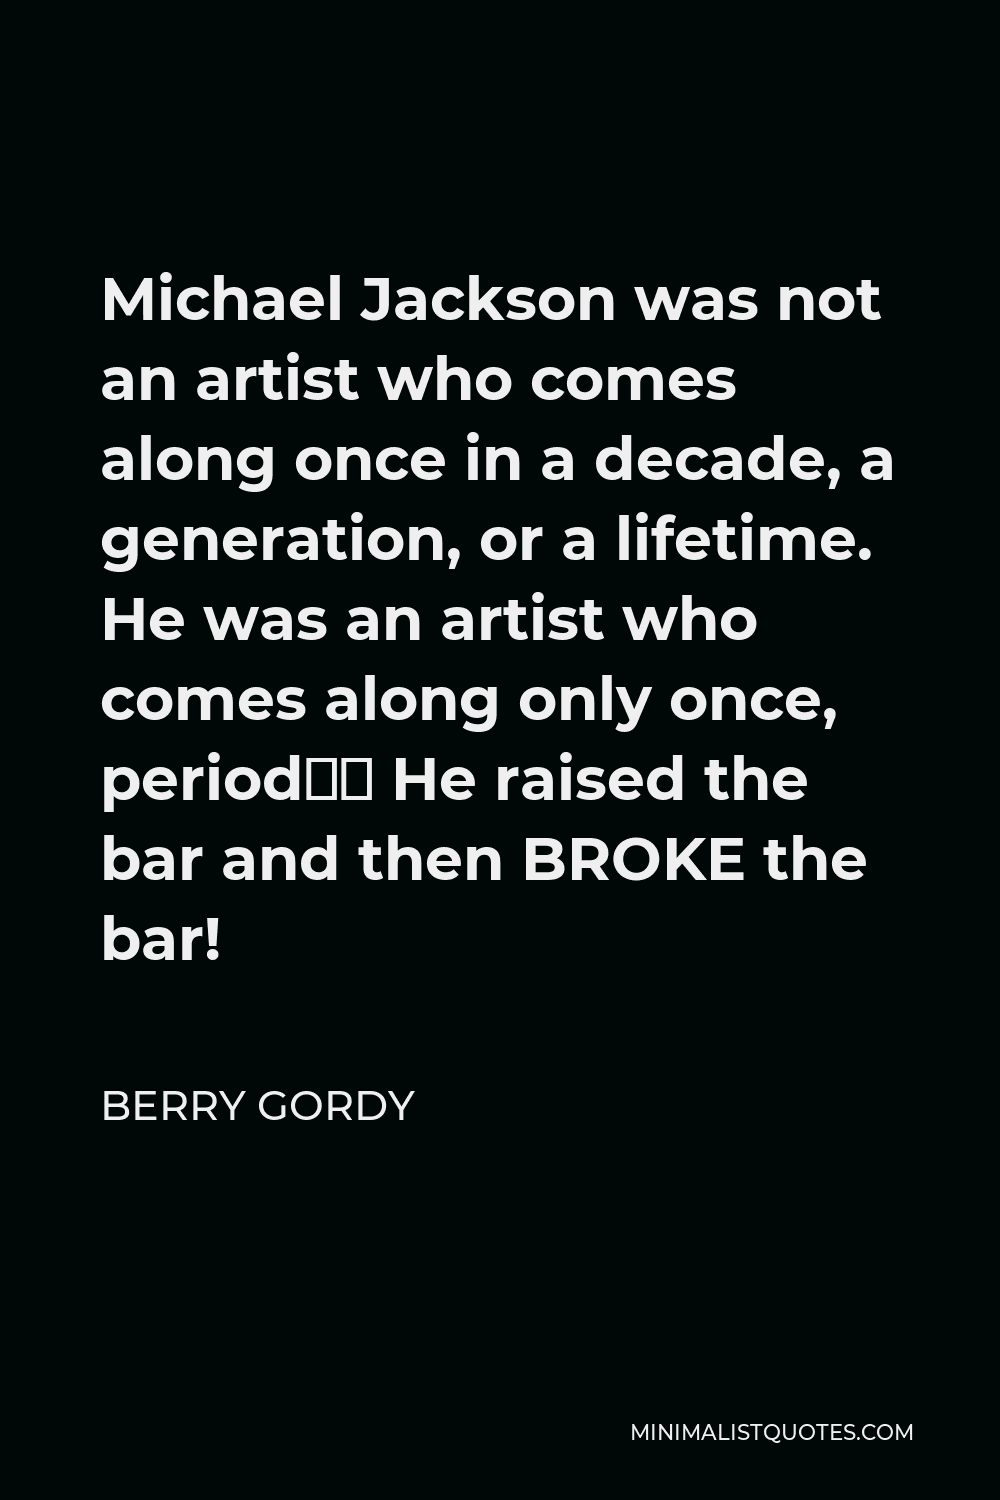 Berry Gordy Quote - Michael Jackson was not an artist who comes along once in a decade, a generation, or a lifetime. He was an artist who comes along only once, period… He raised the bar and then BROKE the bar!